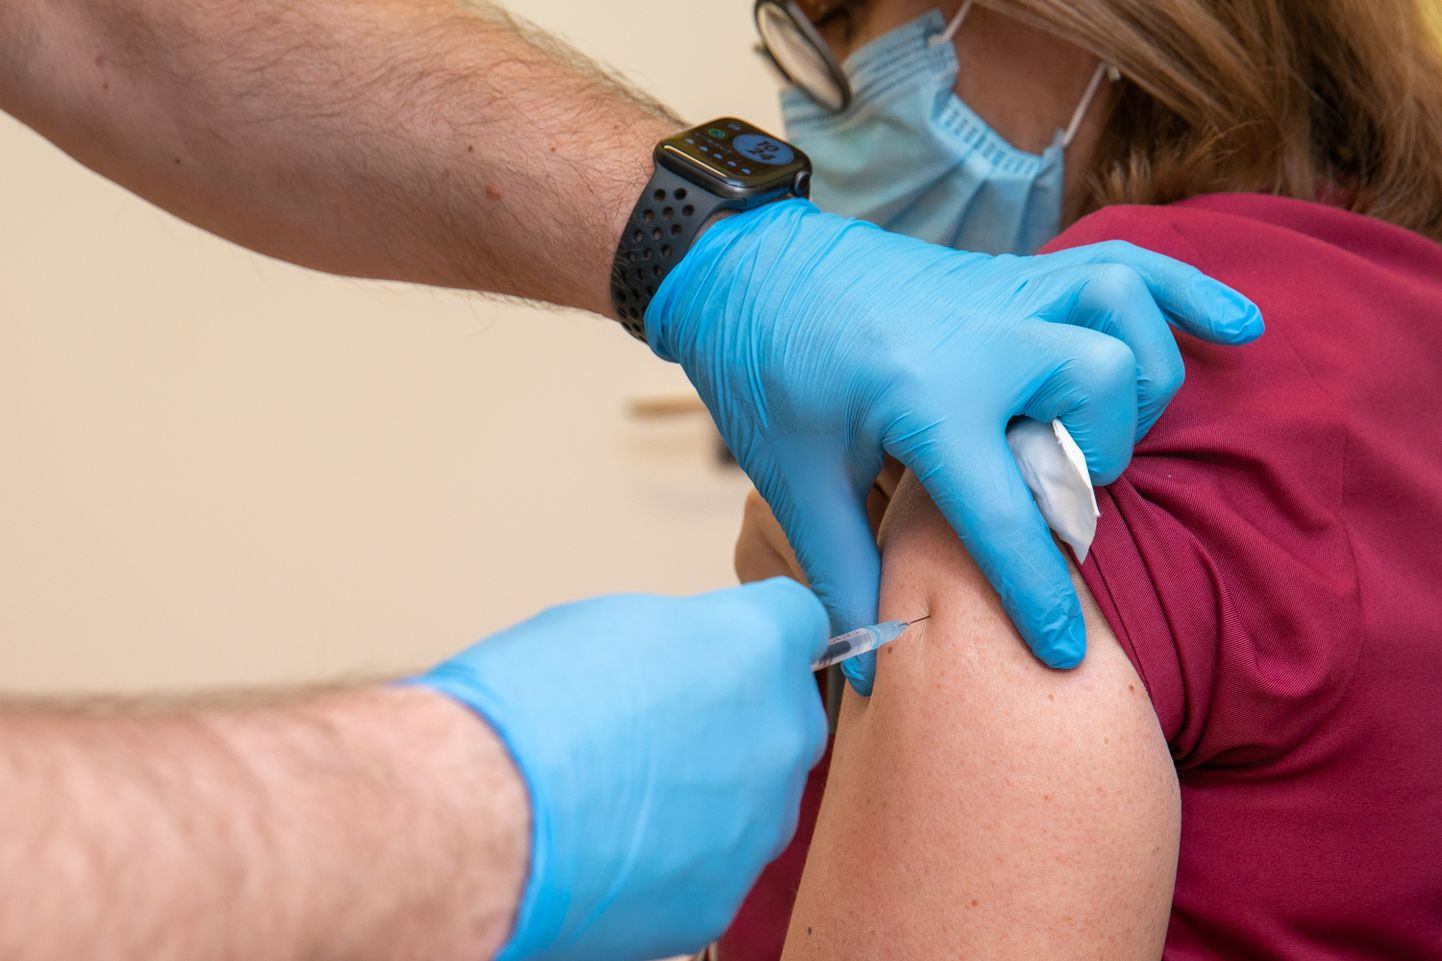 The state’s immunization plan prescribes vaccinating medical and nursing home staff and risk groups first – some 315,000 people.